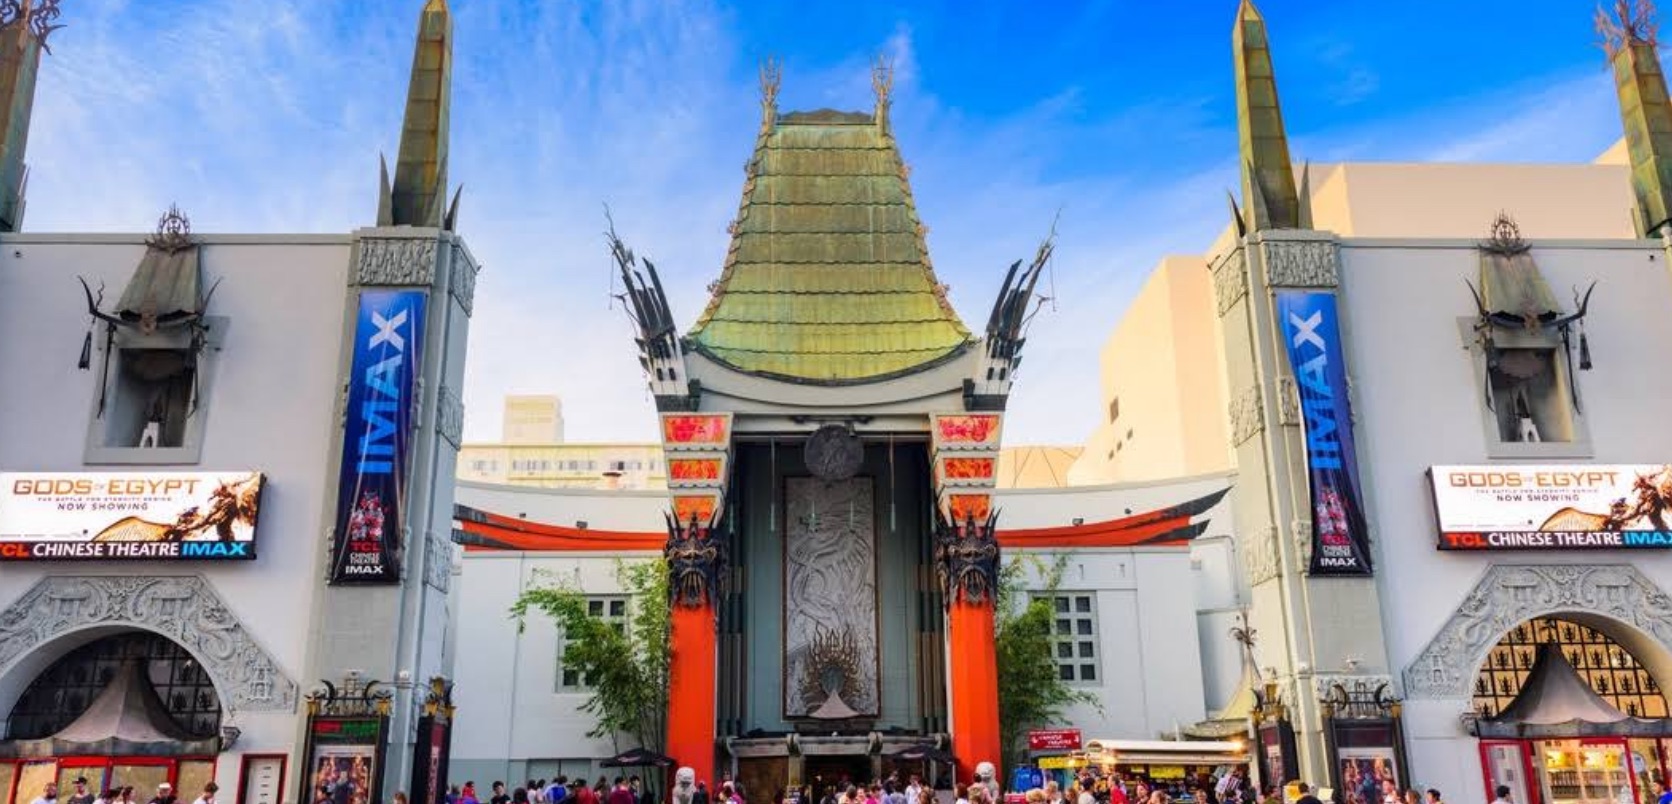 TCL Chinese Theatre Hollywood